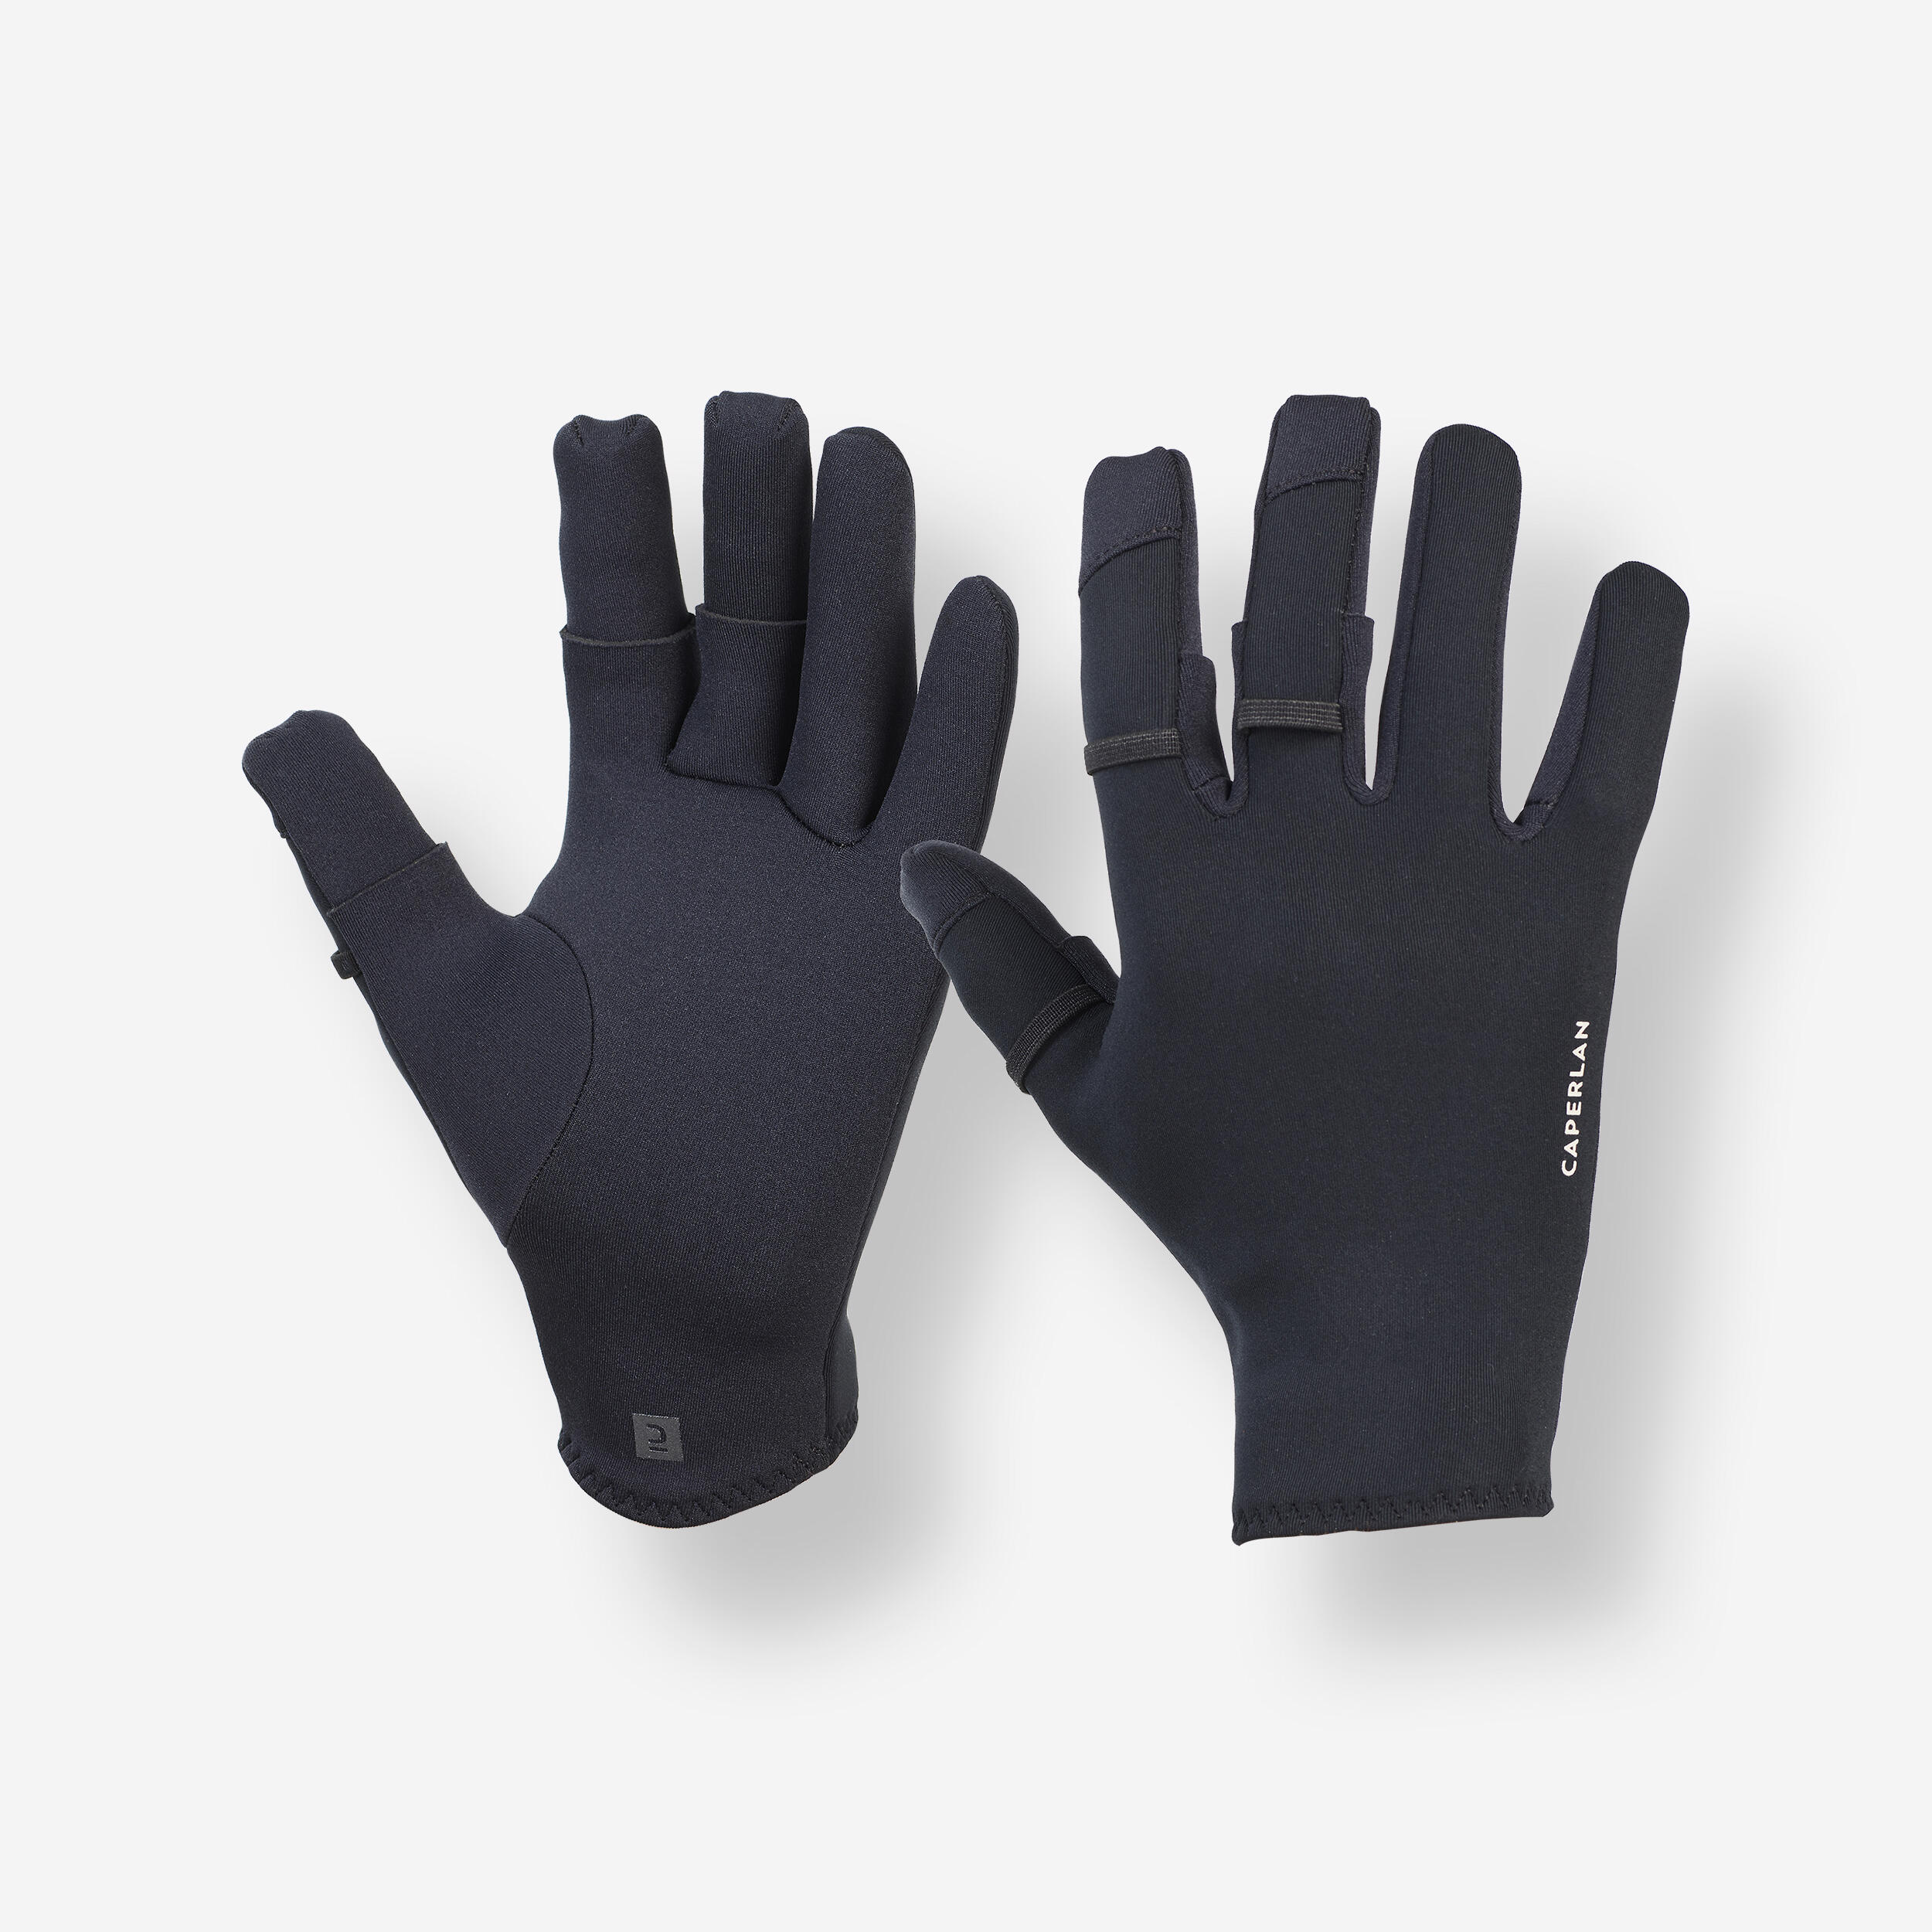 Fishing Neoprene Gloves Thermo with Three Opening Fingers 1 mm - 500 Black